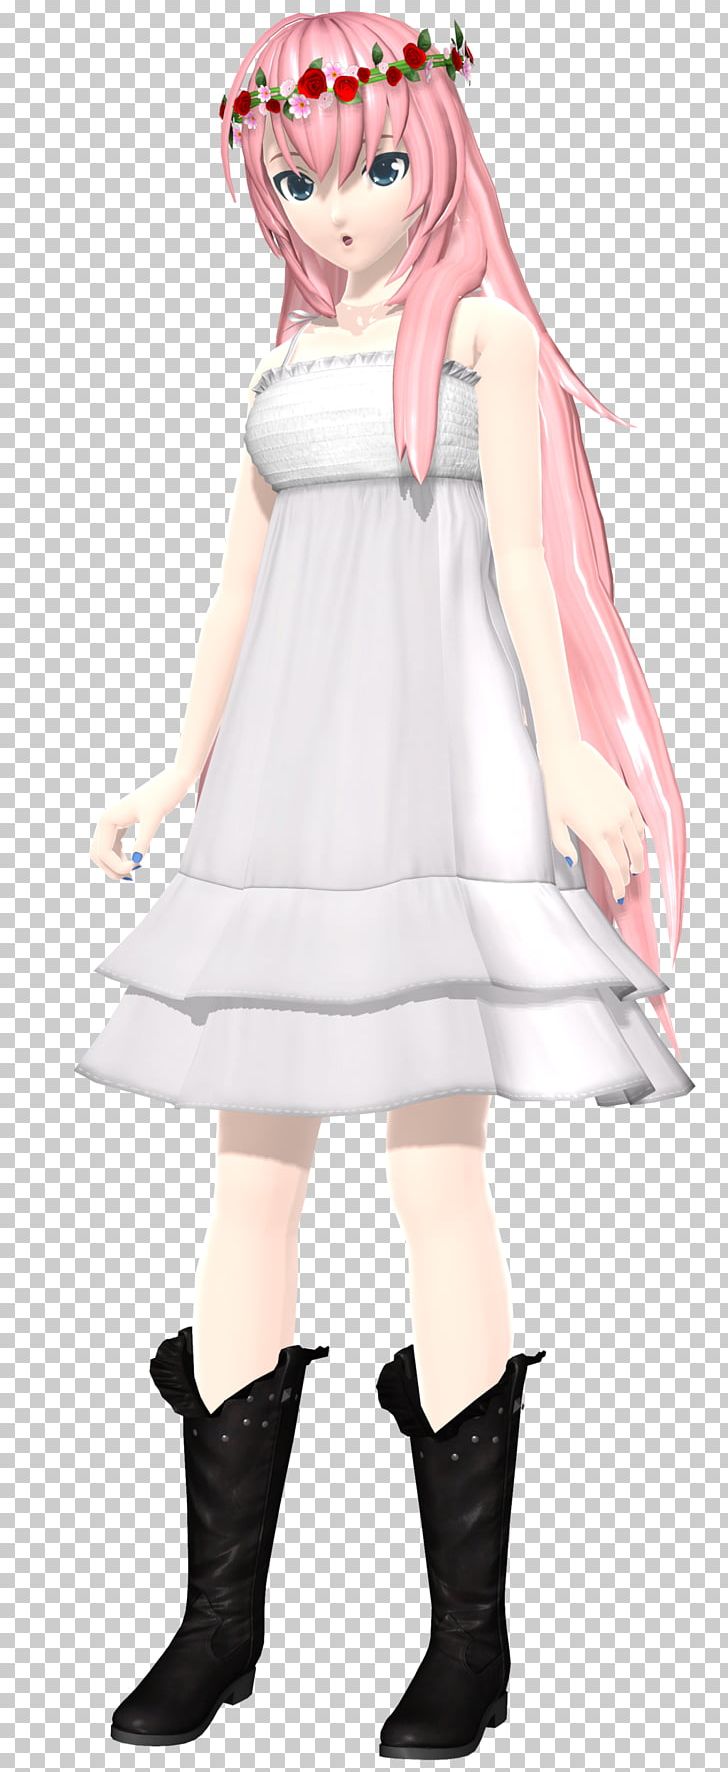 Hatsune Miku: Project DIVA Arcade Future Tone Hatsune Miku: Project DIVA 2nd Hatsune Miku: Project DIVA F 2nd Megurine Luka PNG, Clipart, Anime, Brown Hair, Chiffon, Clothing, Costume Free PNG Download